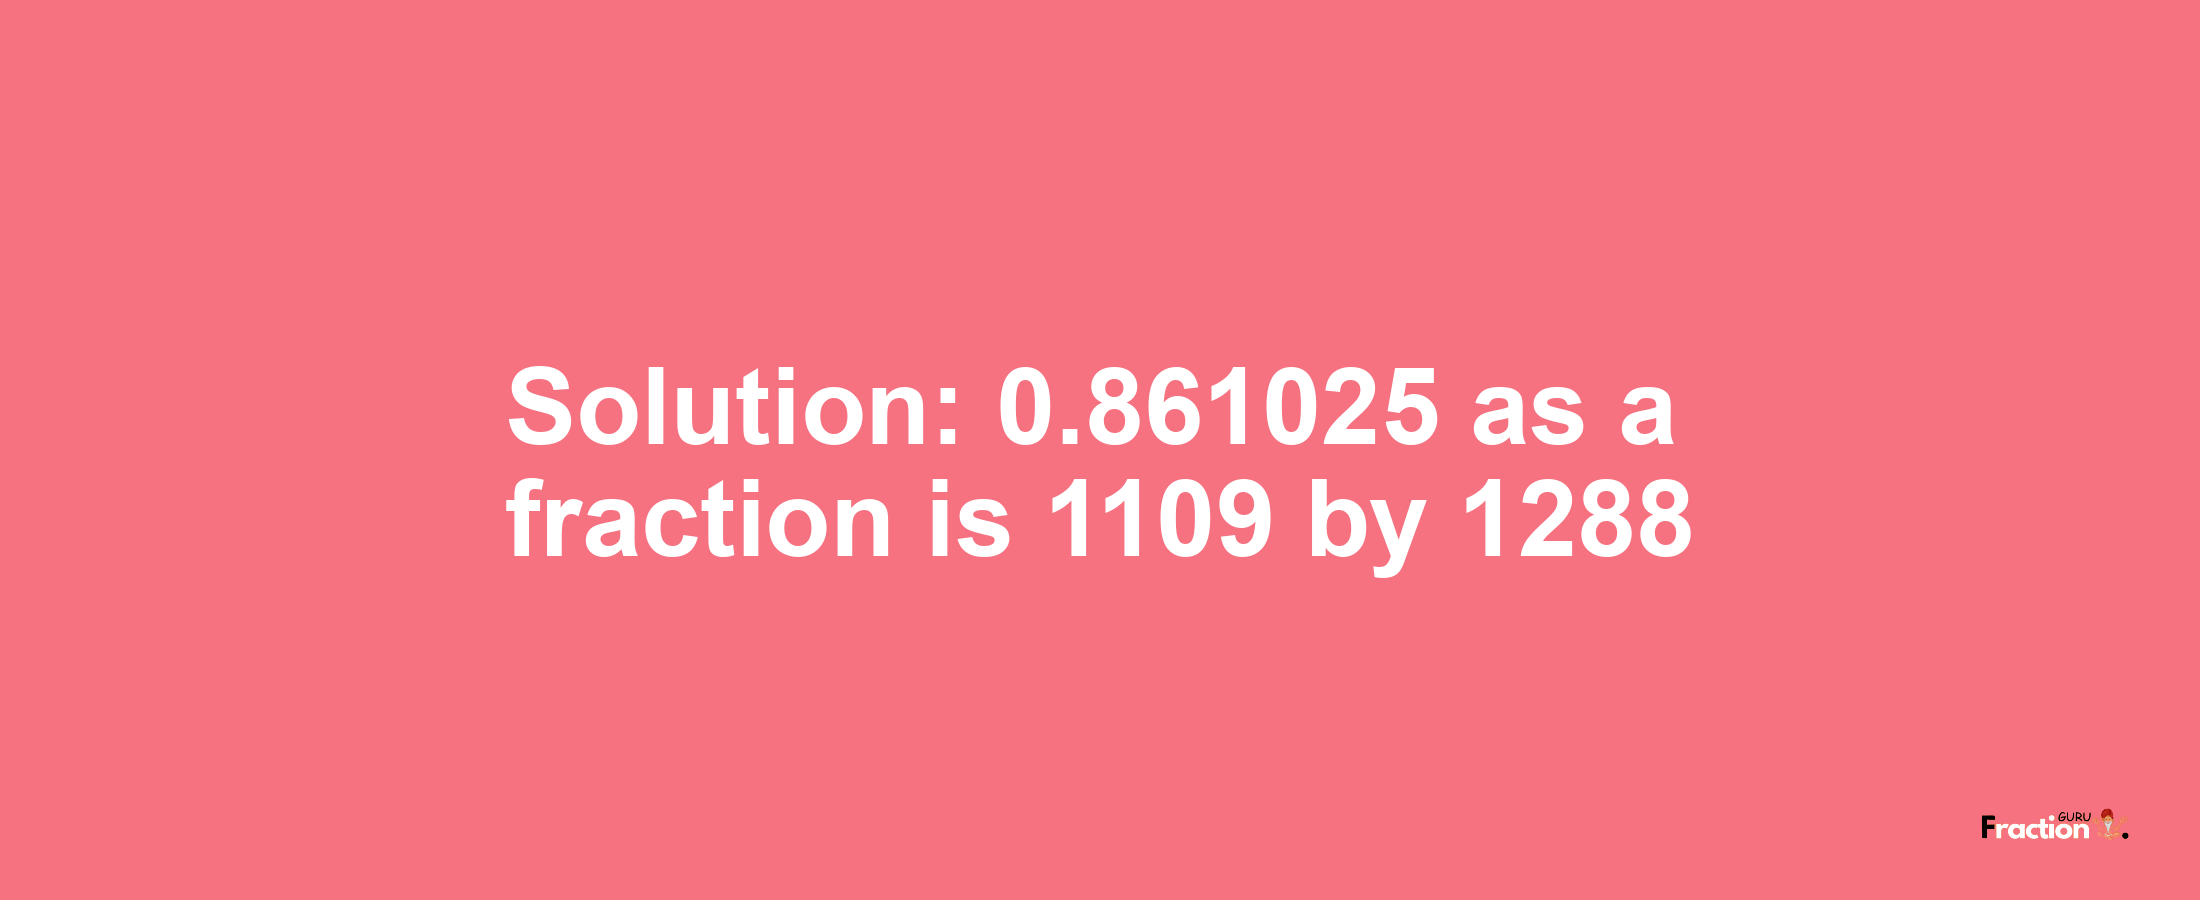 Solution:0.861025 as a fraction is 1109/1288